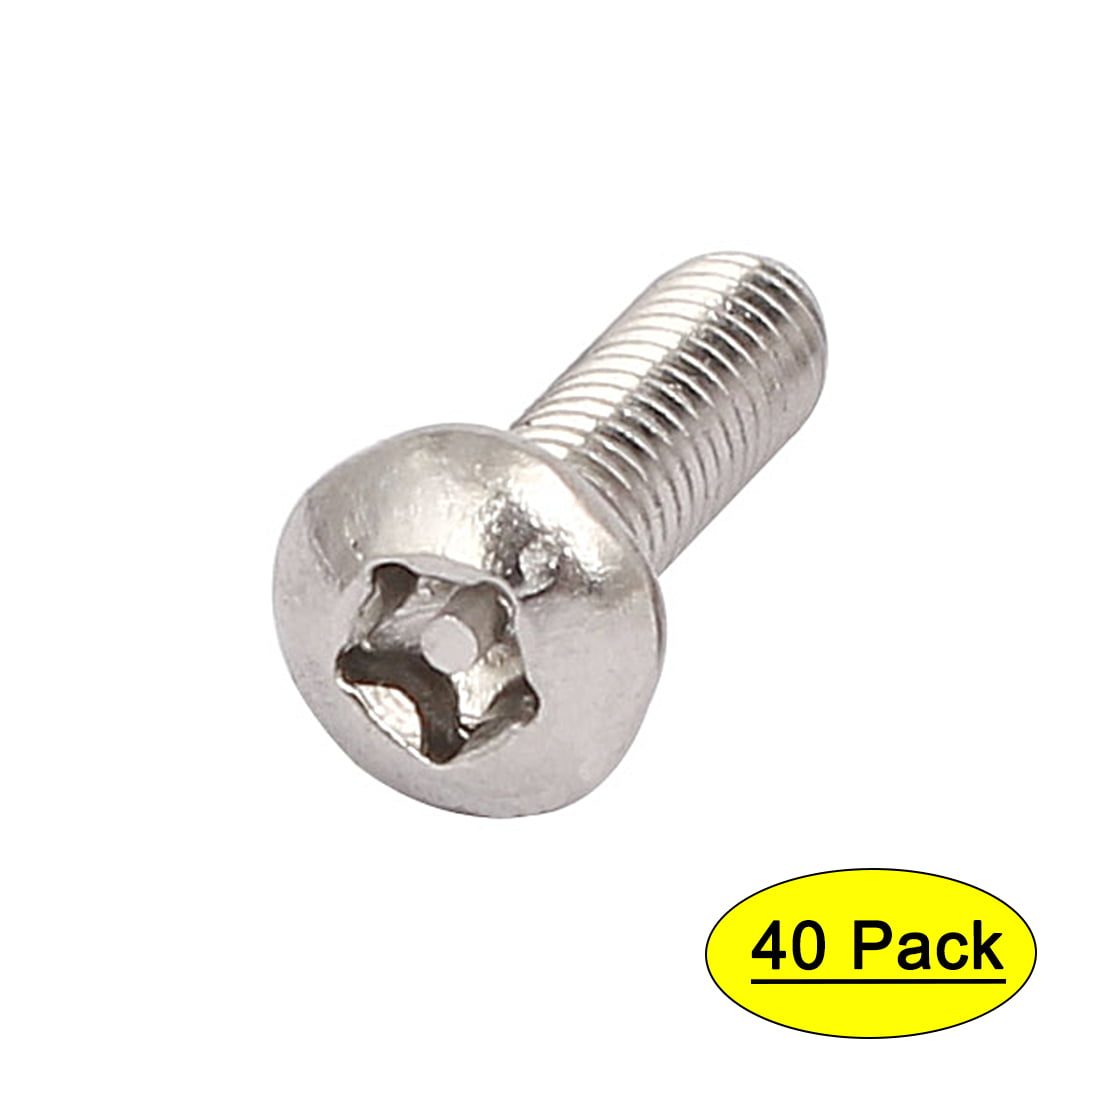 Qty 100 Button Post Torx M3 x 16mm Stainless T10 Security Screws Tamperproof 304 